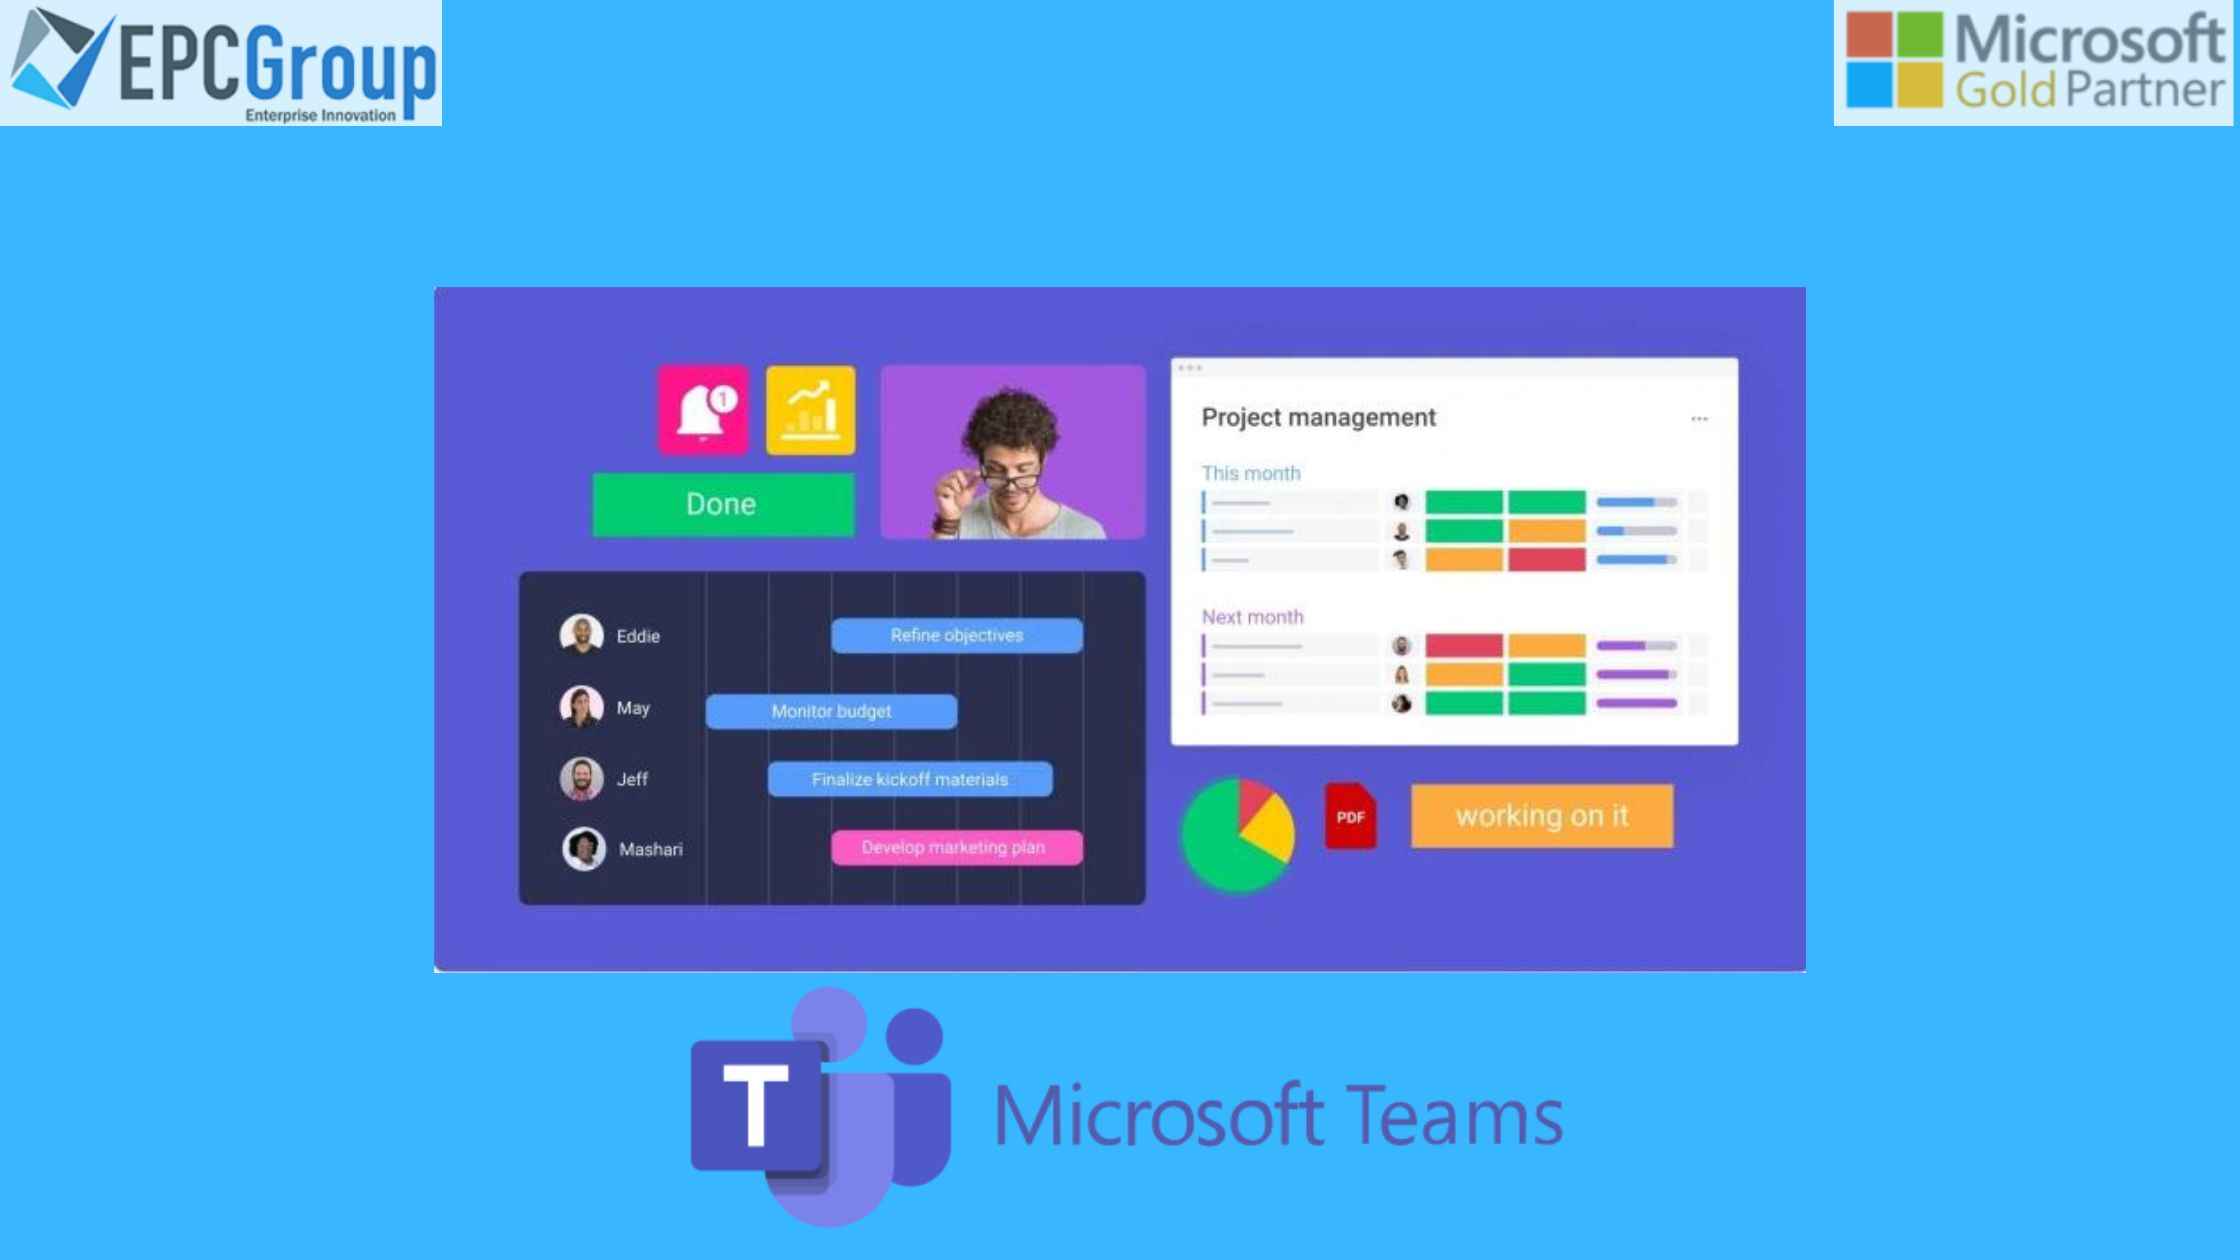 How to Use Microsoft Teams for Efficient Project Management